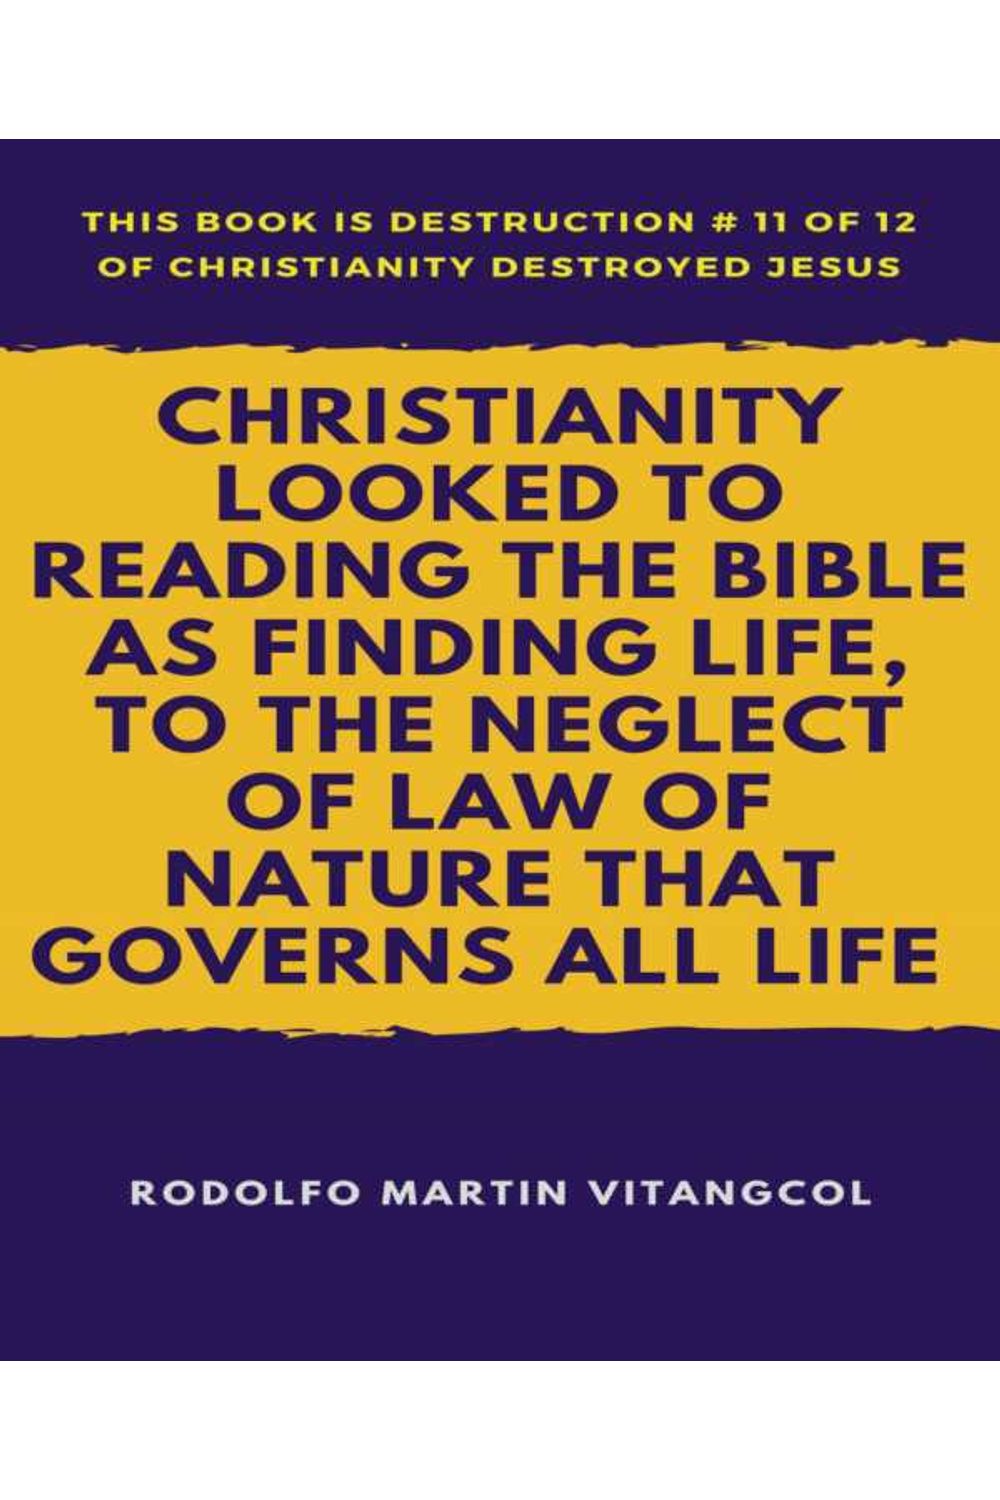 bw-christianity-looked-to-reading-the-bible-as-finding-life-to-the-neglect-of-law-of-nature-that-governs-all-life-bookrix-9783743893979